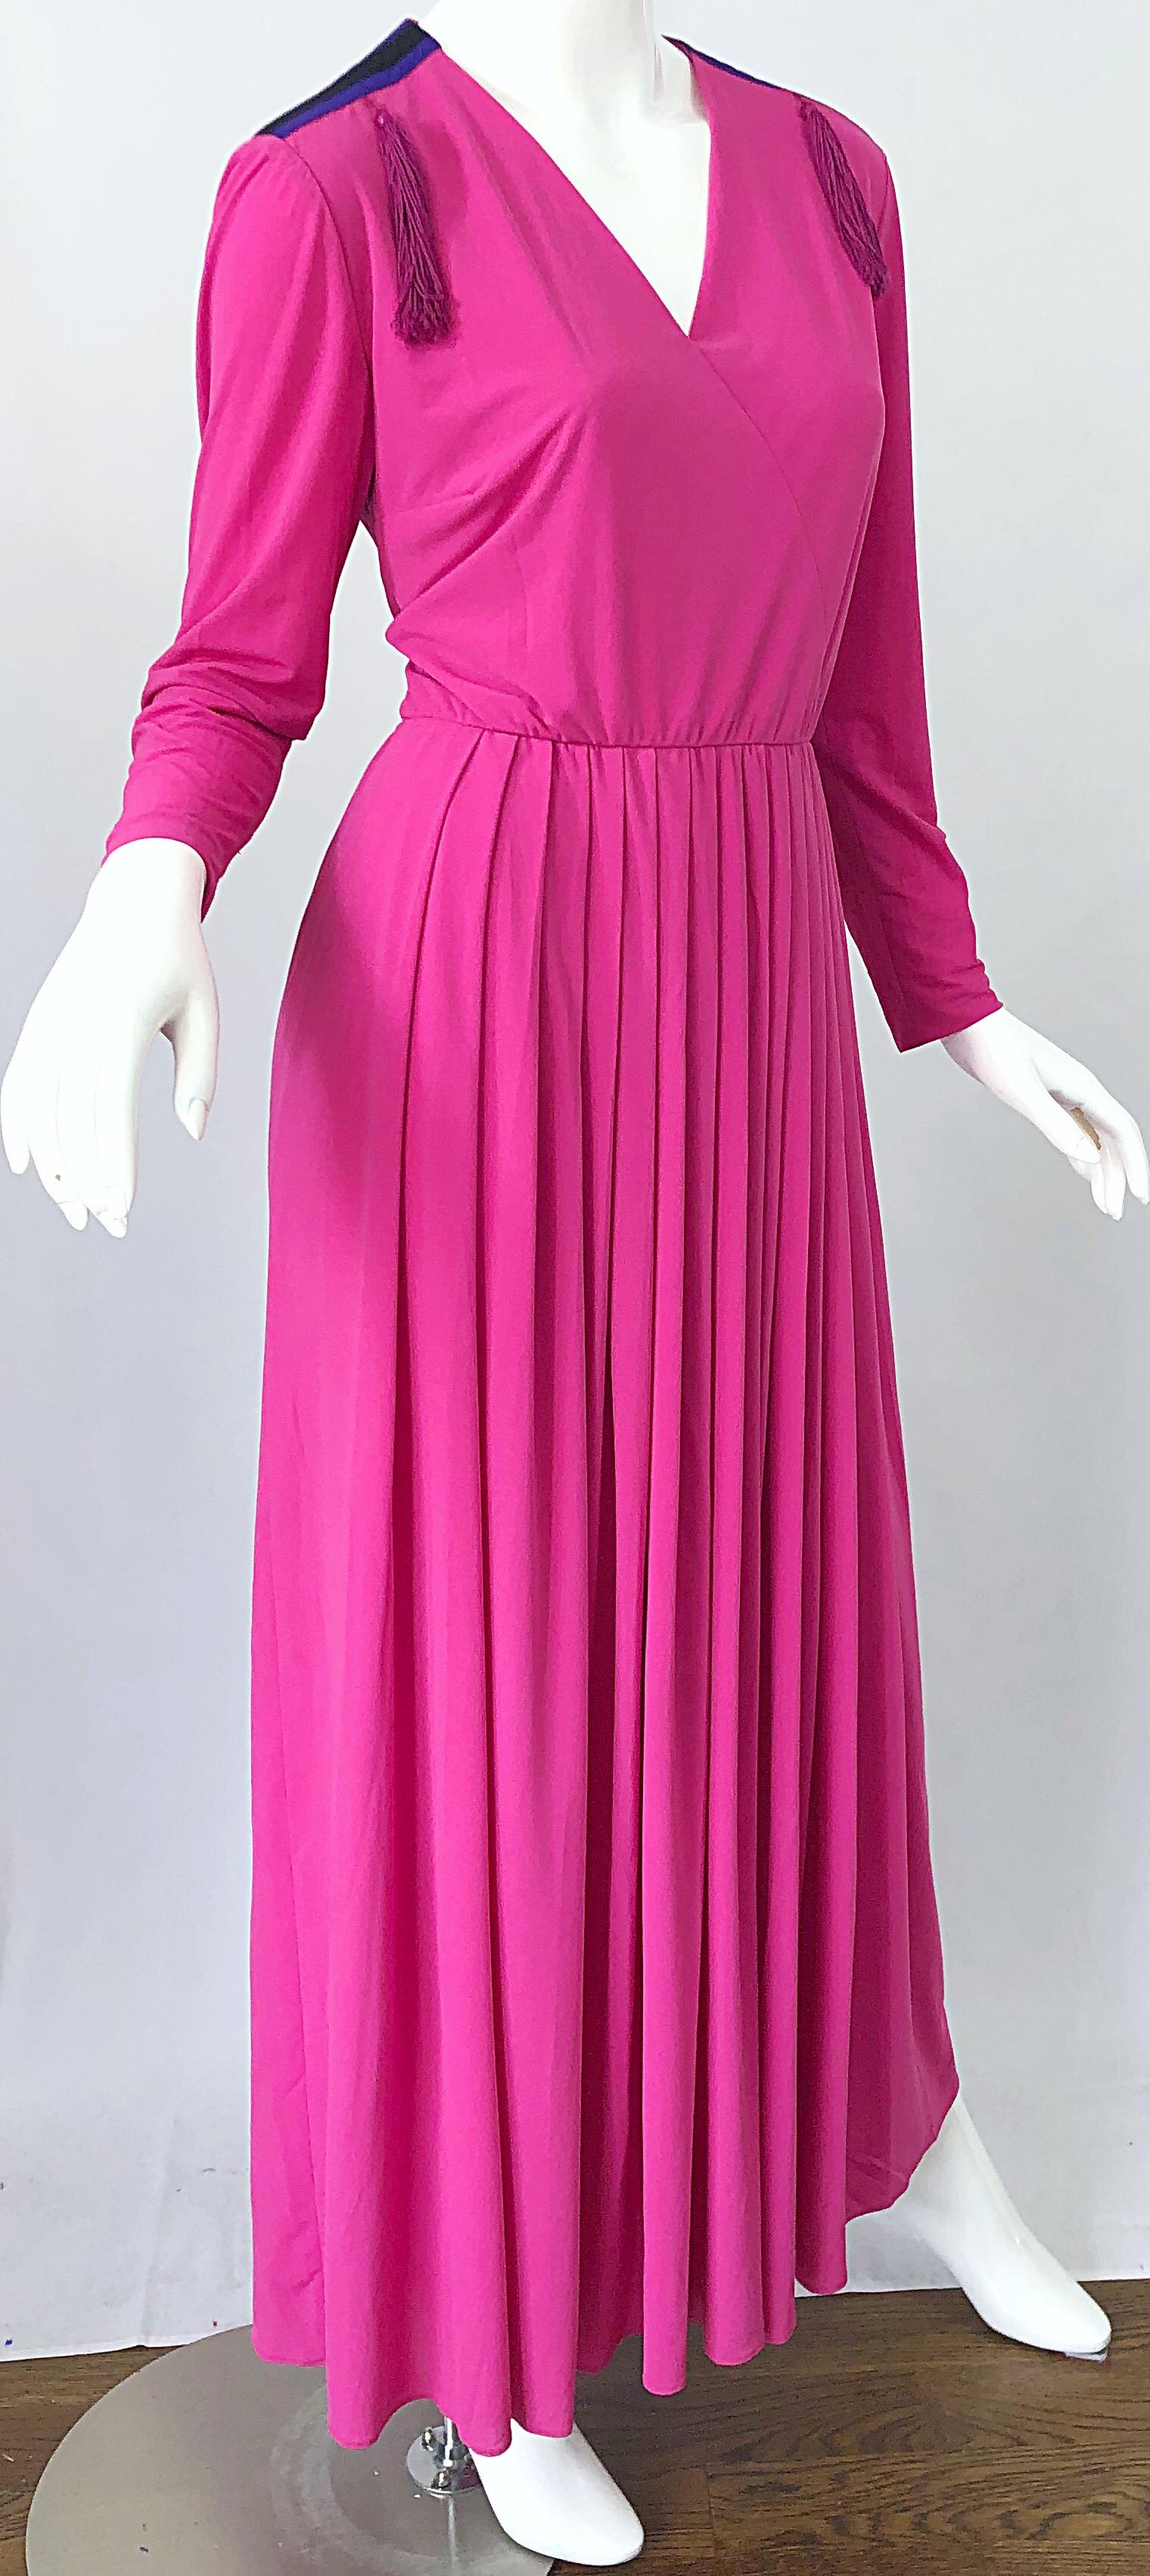 1970s Fink Modell Hot Pink Tassel Rayon Jersey Vintage 70s Maxi Dress Gown For Sale 3